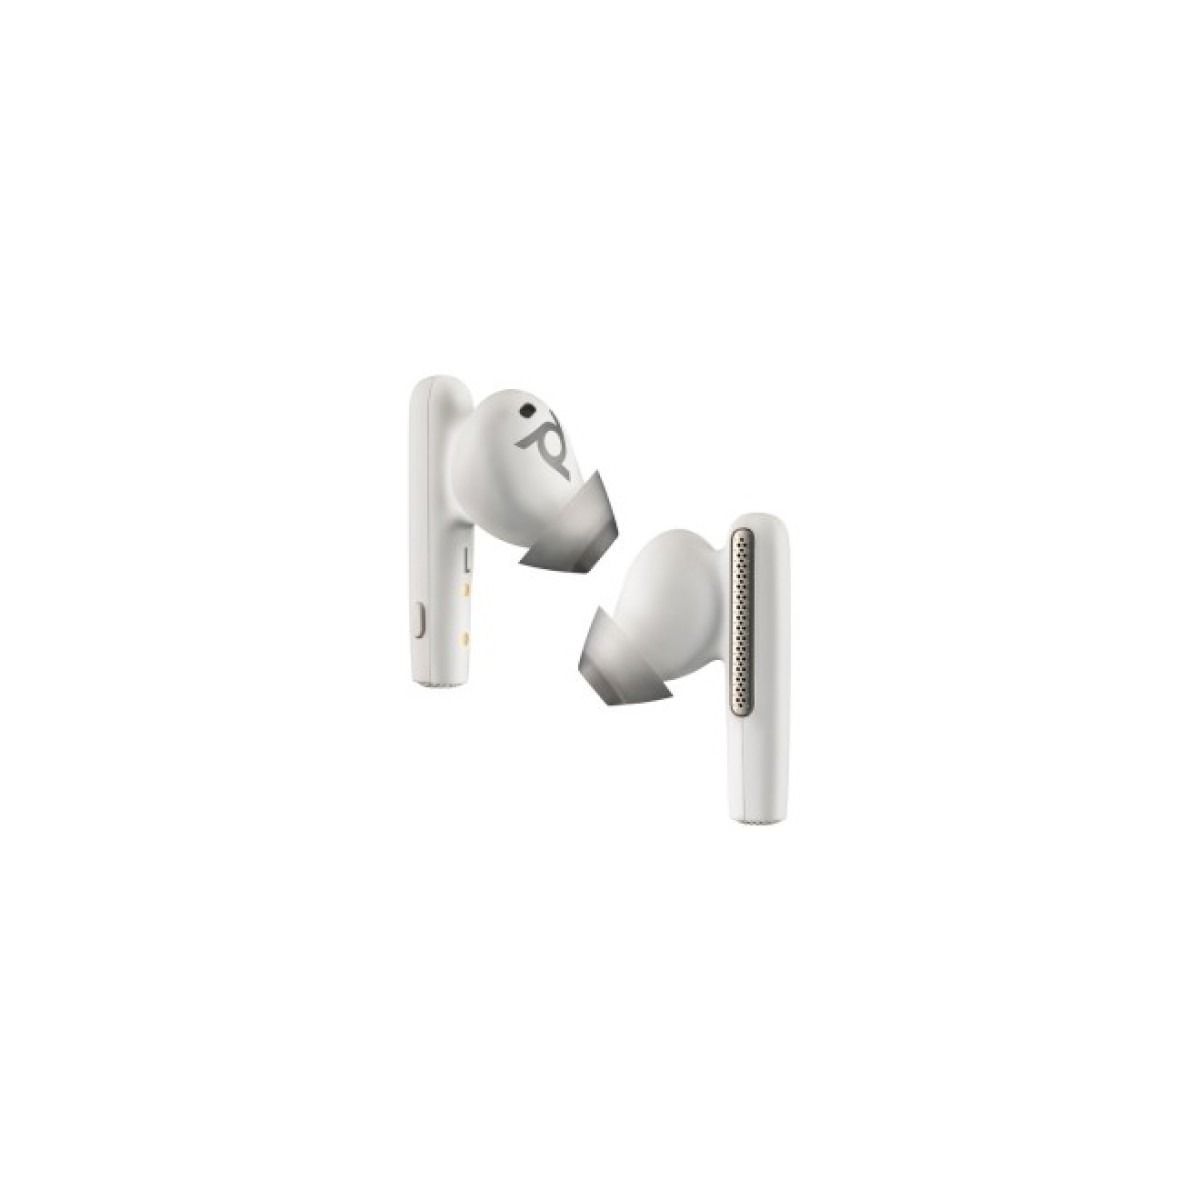 Наушники Poly Voyager Free 60 Earbuds + BT700C + BCHC White (7Y8L4AA) 256_256.jpg